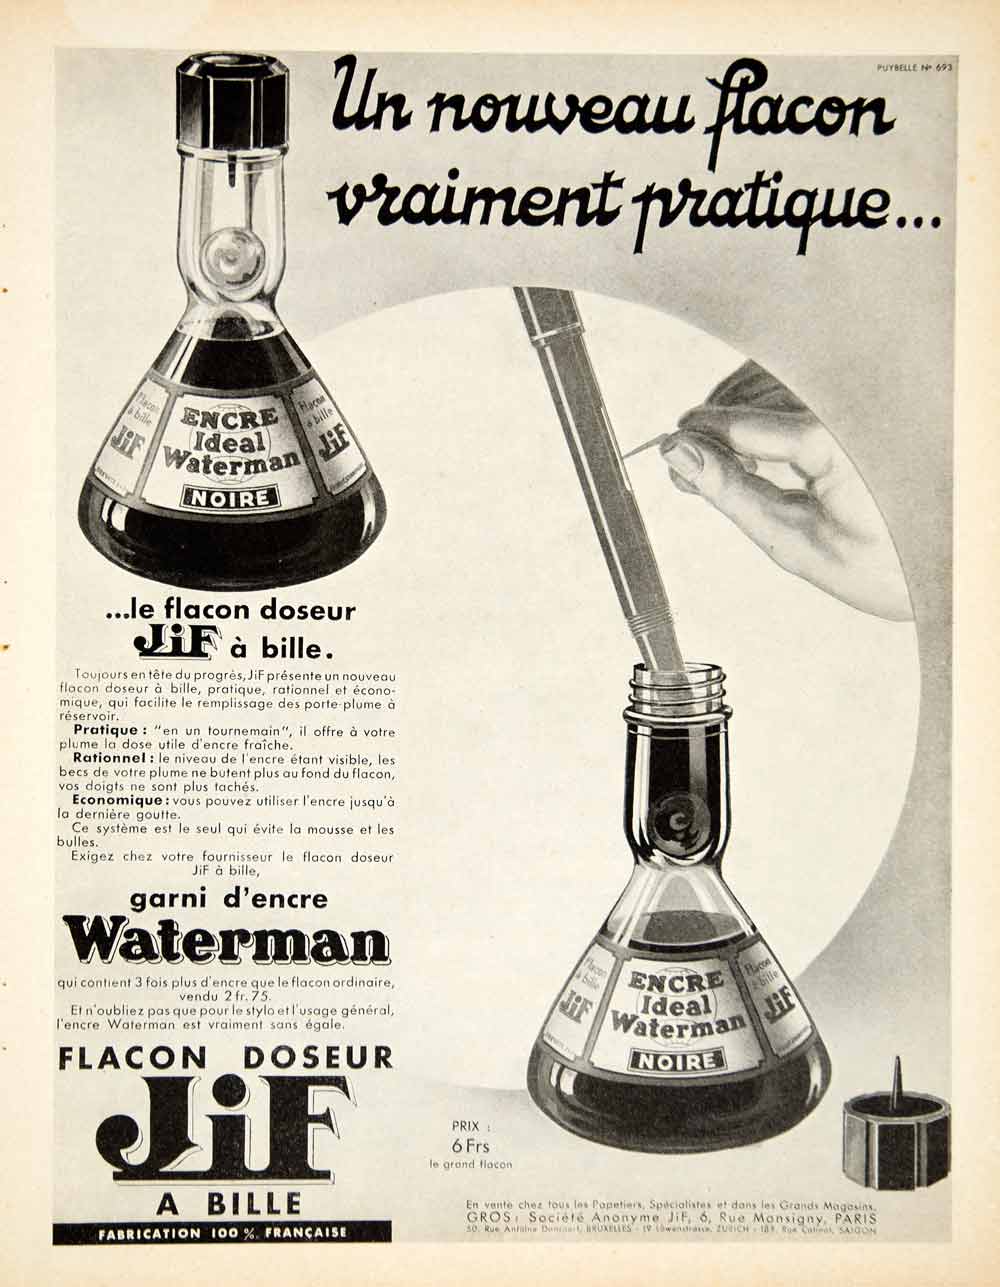 1935 Ad Vintage French Encre Ideal Watermen Fountain Pen Ink Dispenser JiF VEN9